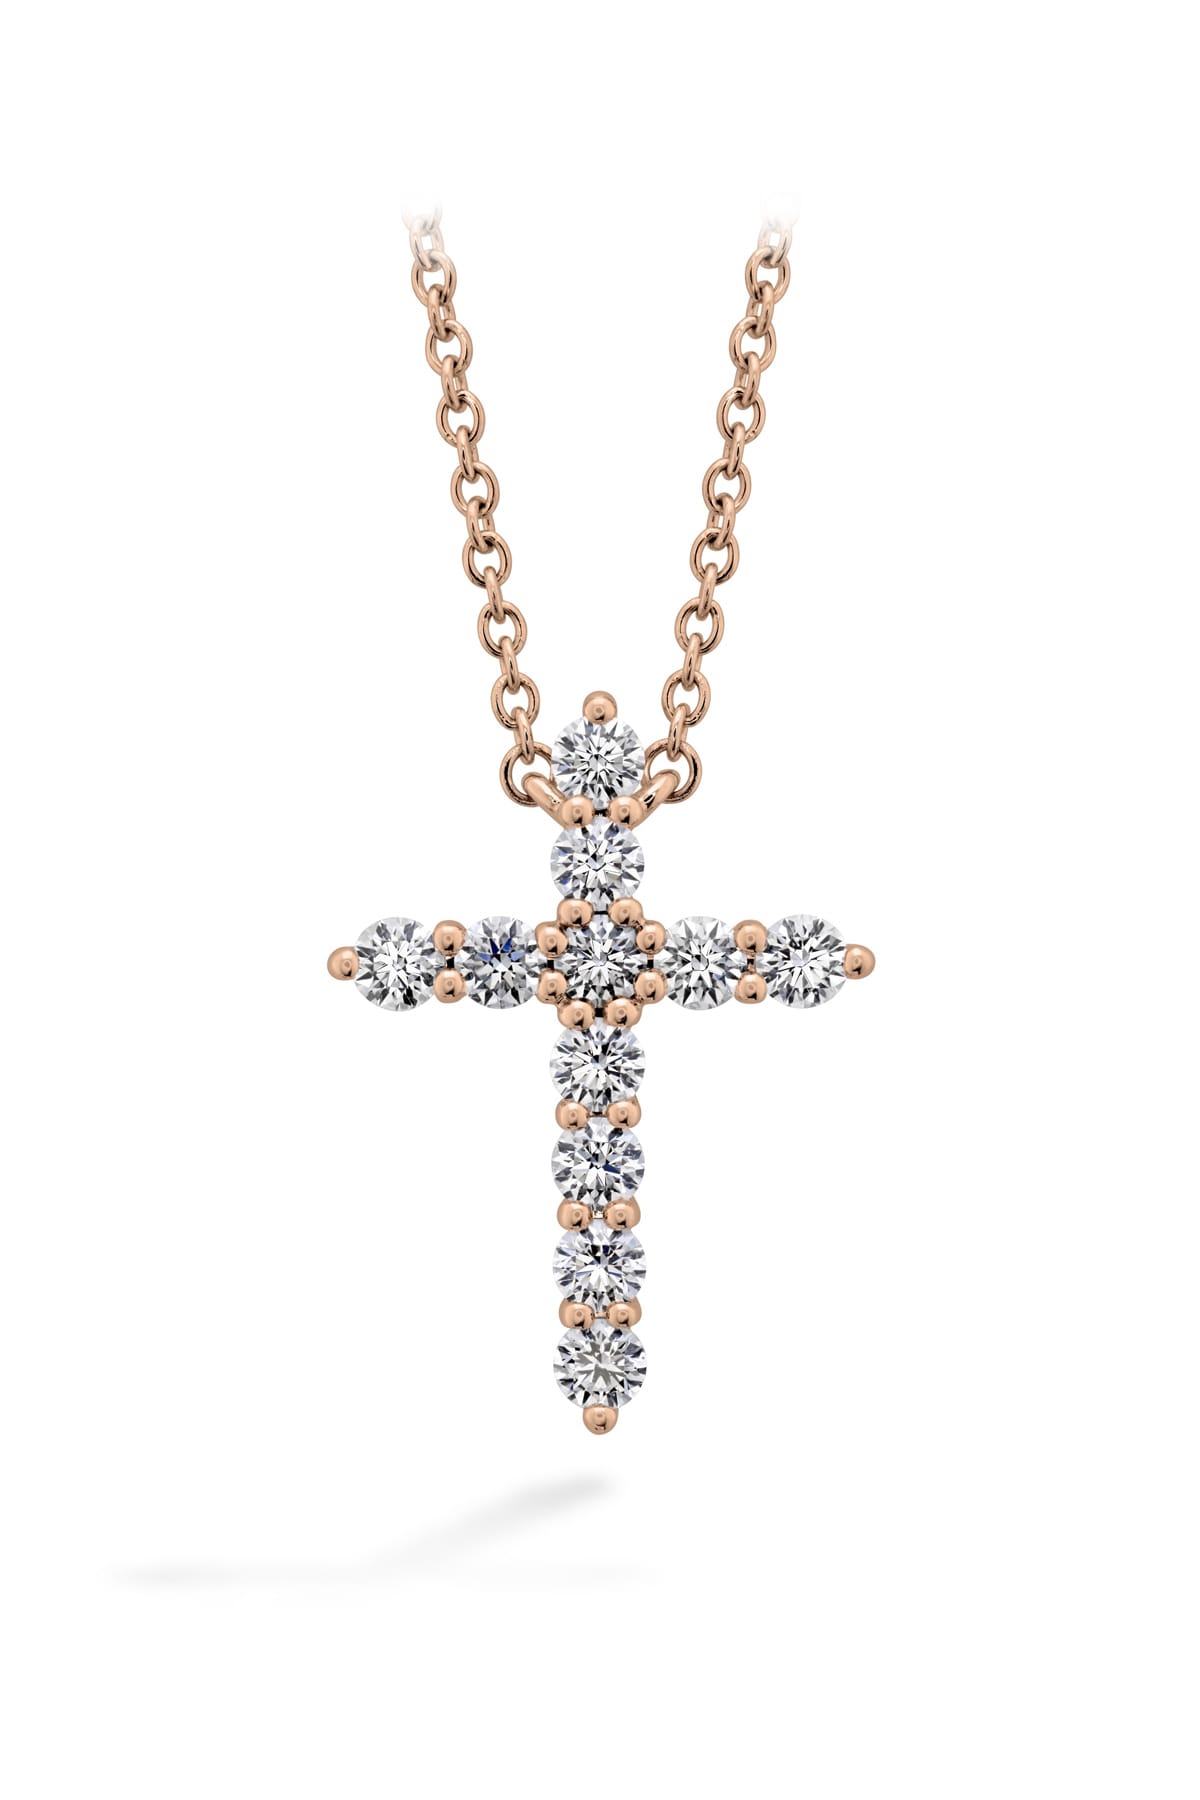 Signature Cross Pendant - Large From Hearts On Fire available at LeGassick Diamonds and Jewellery Gold Coast, Australia.